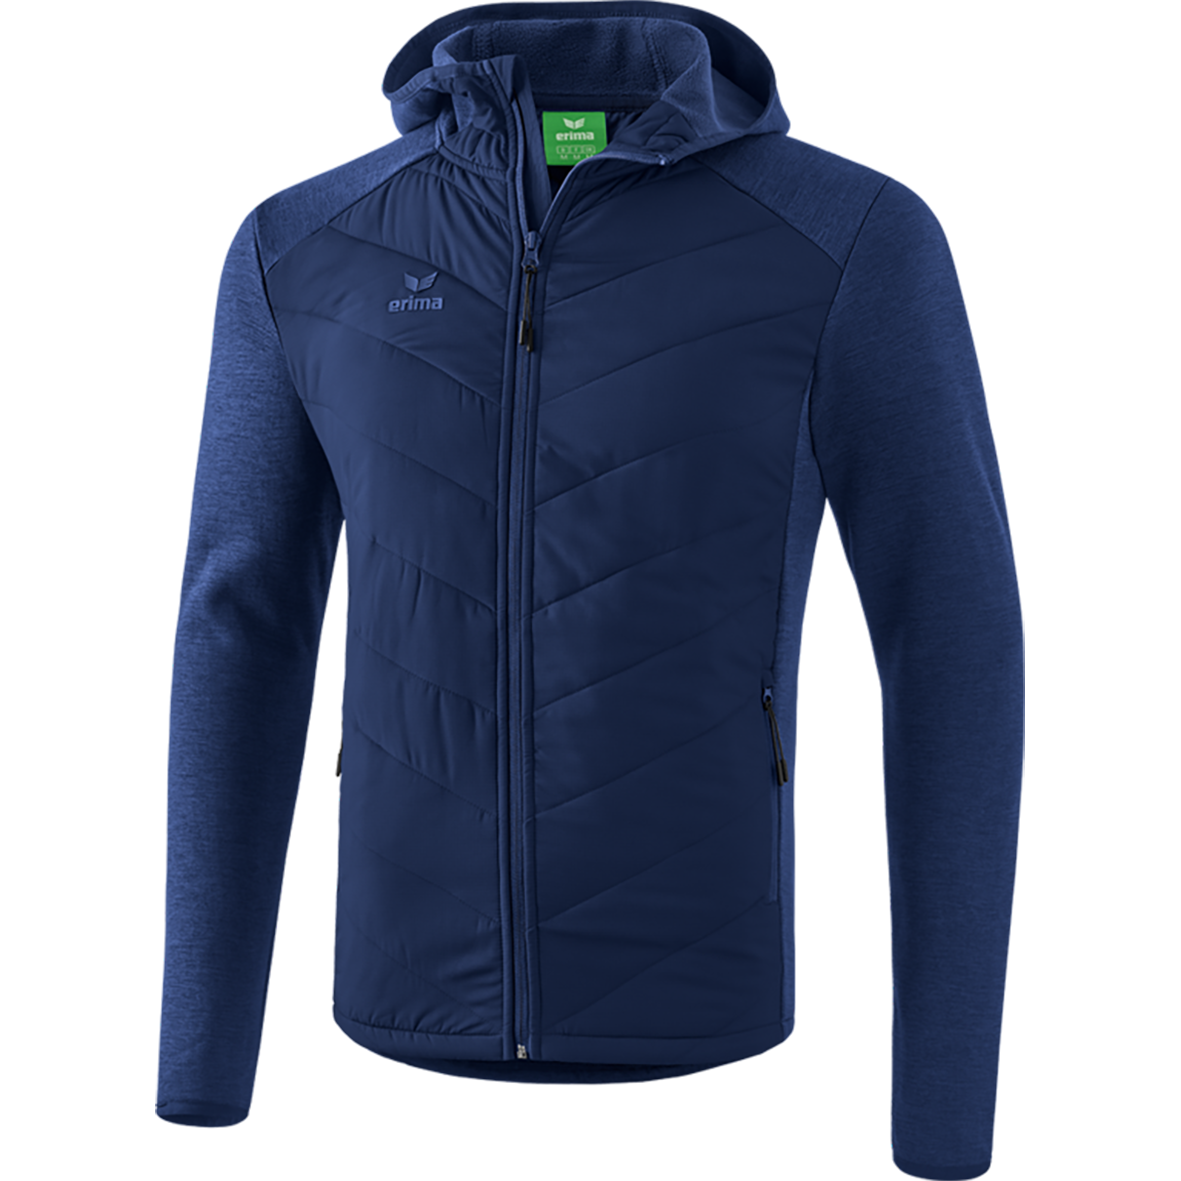 ERIMA QUILTED JACKET FUNCTION, NEW NAVY KIDS.